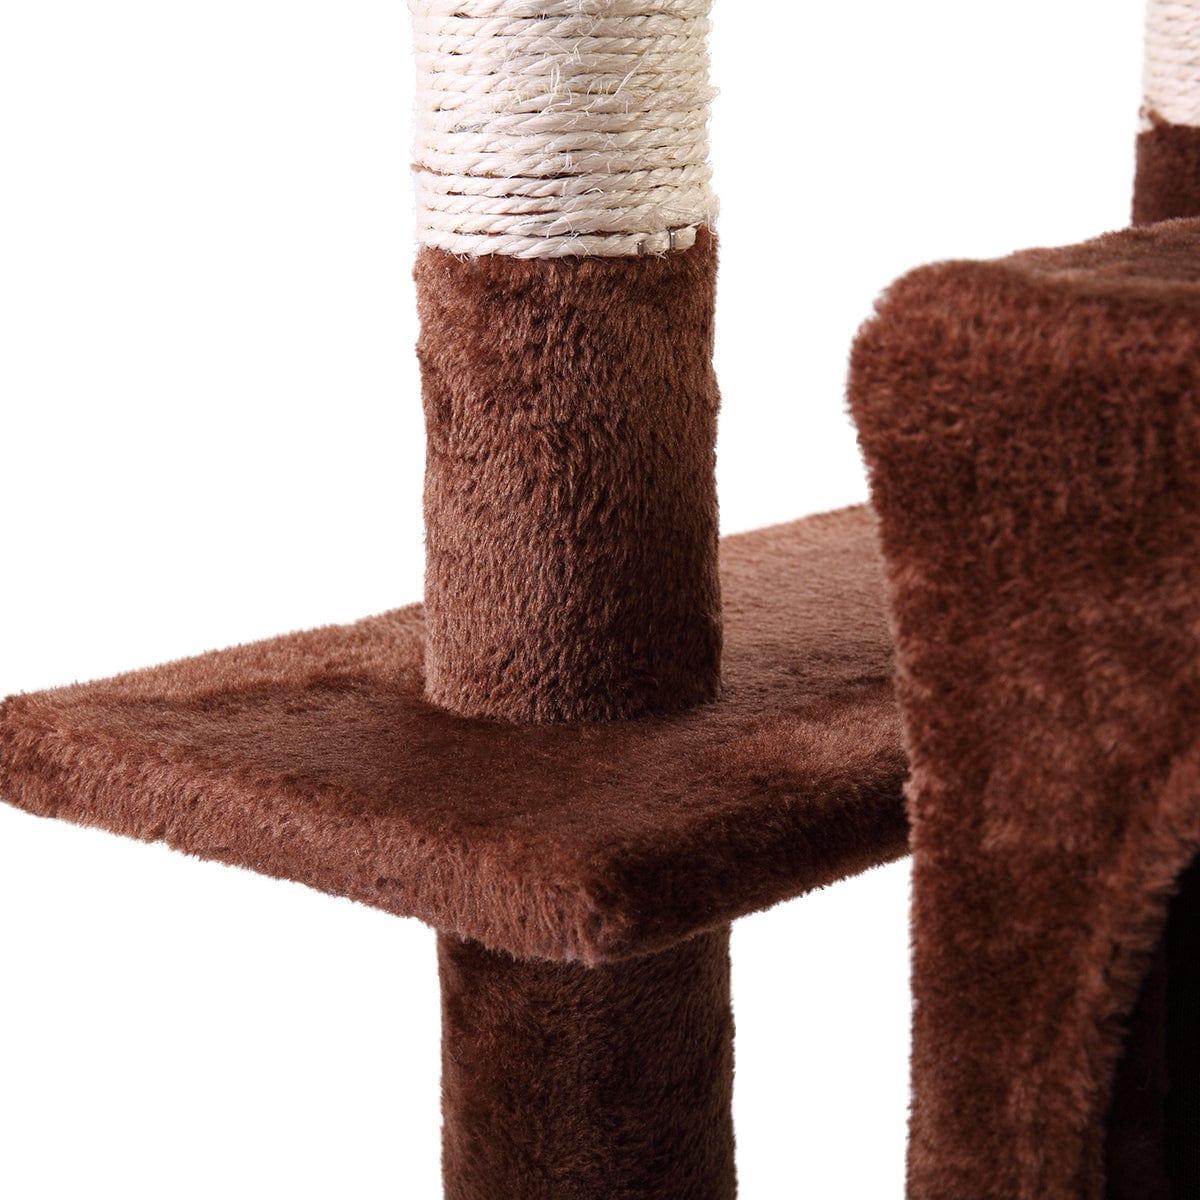 Shop 67" Multi-level Cat Tree, Scratching Posts, Kitten Activity Tower with 3 Perches Mademoiselle Home Decor